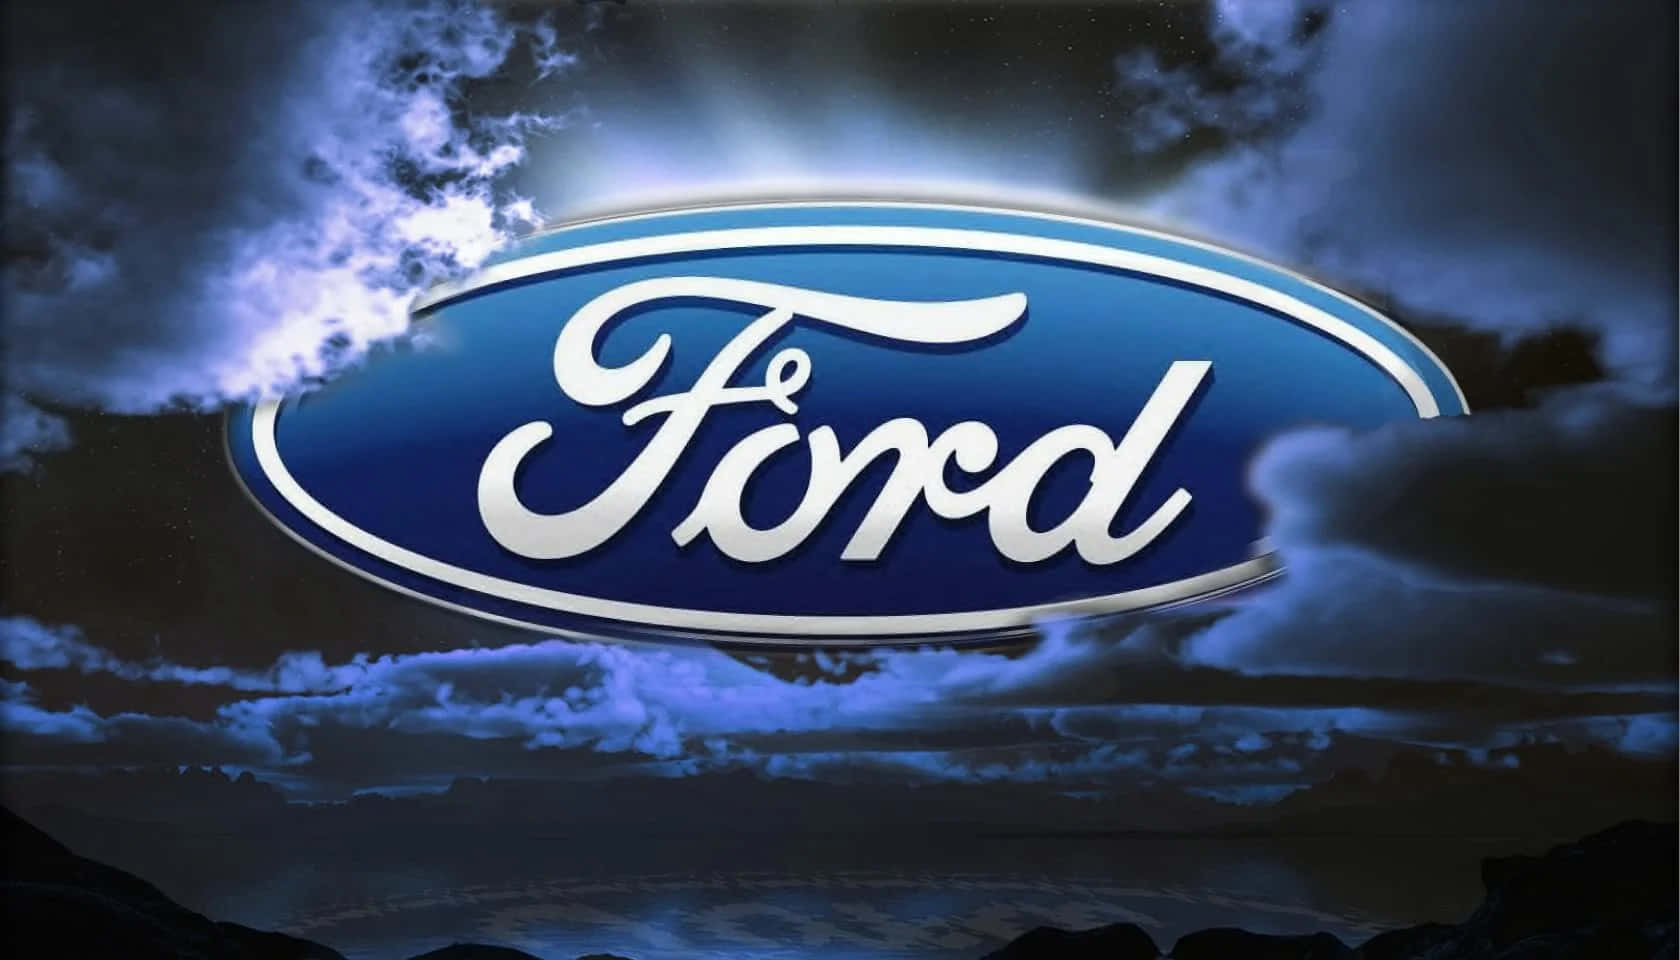 Feel the power of driving a Ford